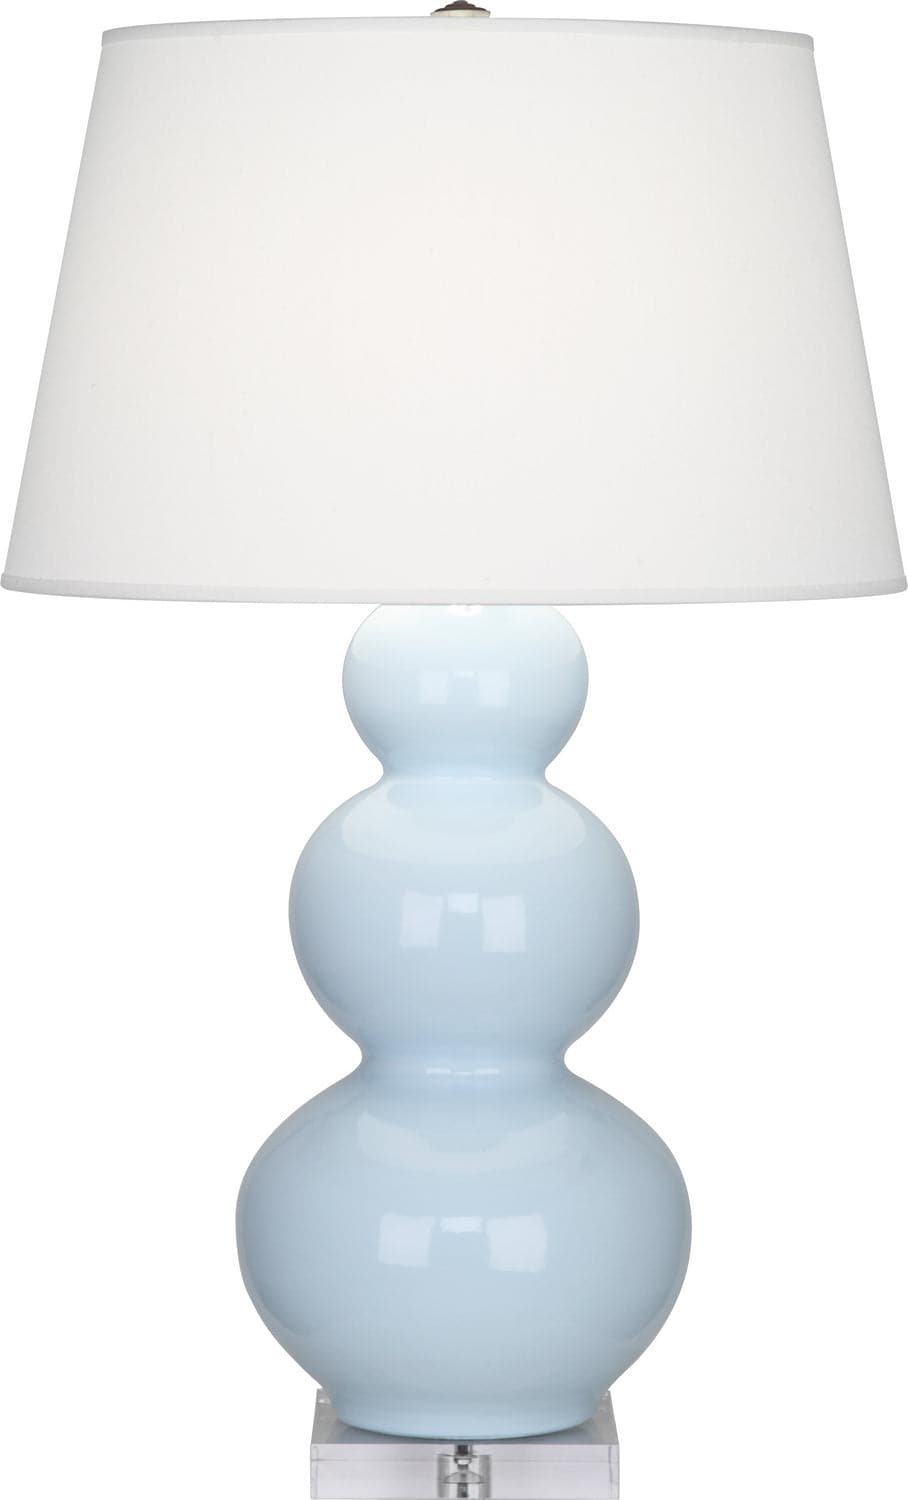 Robert Abbey - A361X - One Light Table Lamp - Triple Gourd - Baby Blue Glazed w/Lucite Base